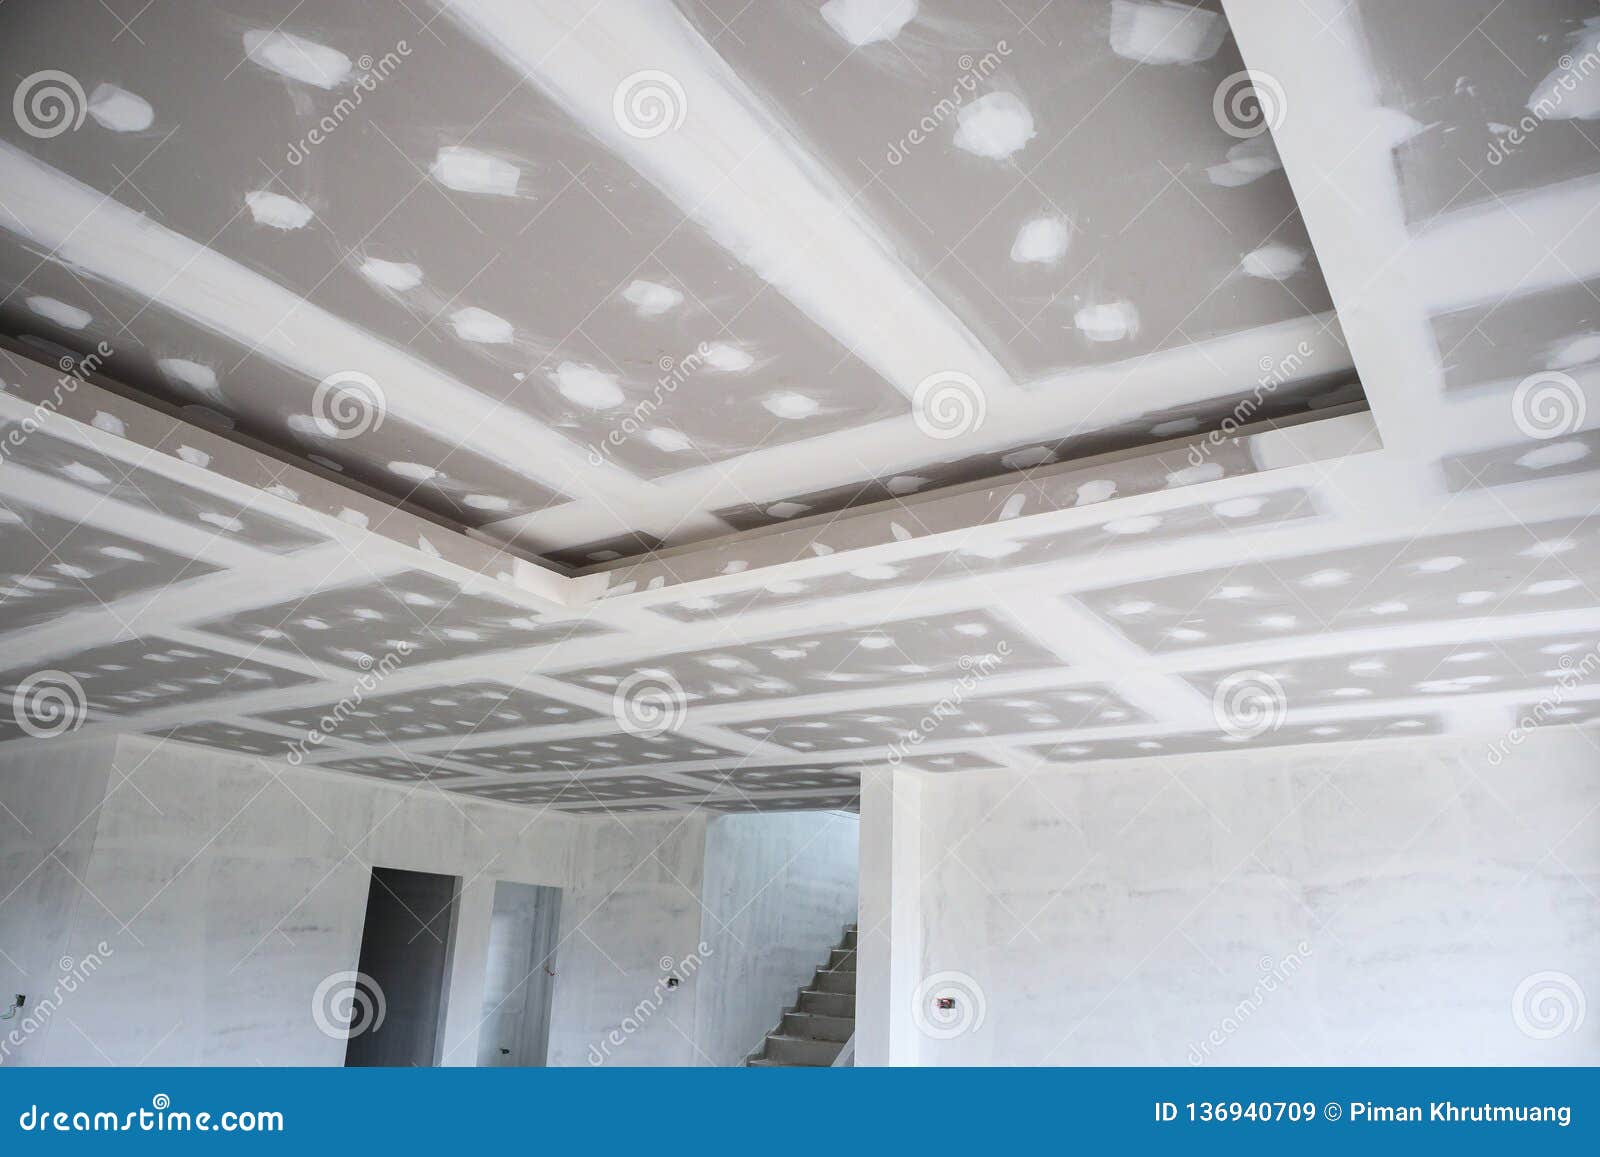 Ceiling Gypsum Board Installation At Construction Site Stock